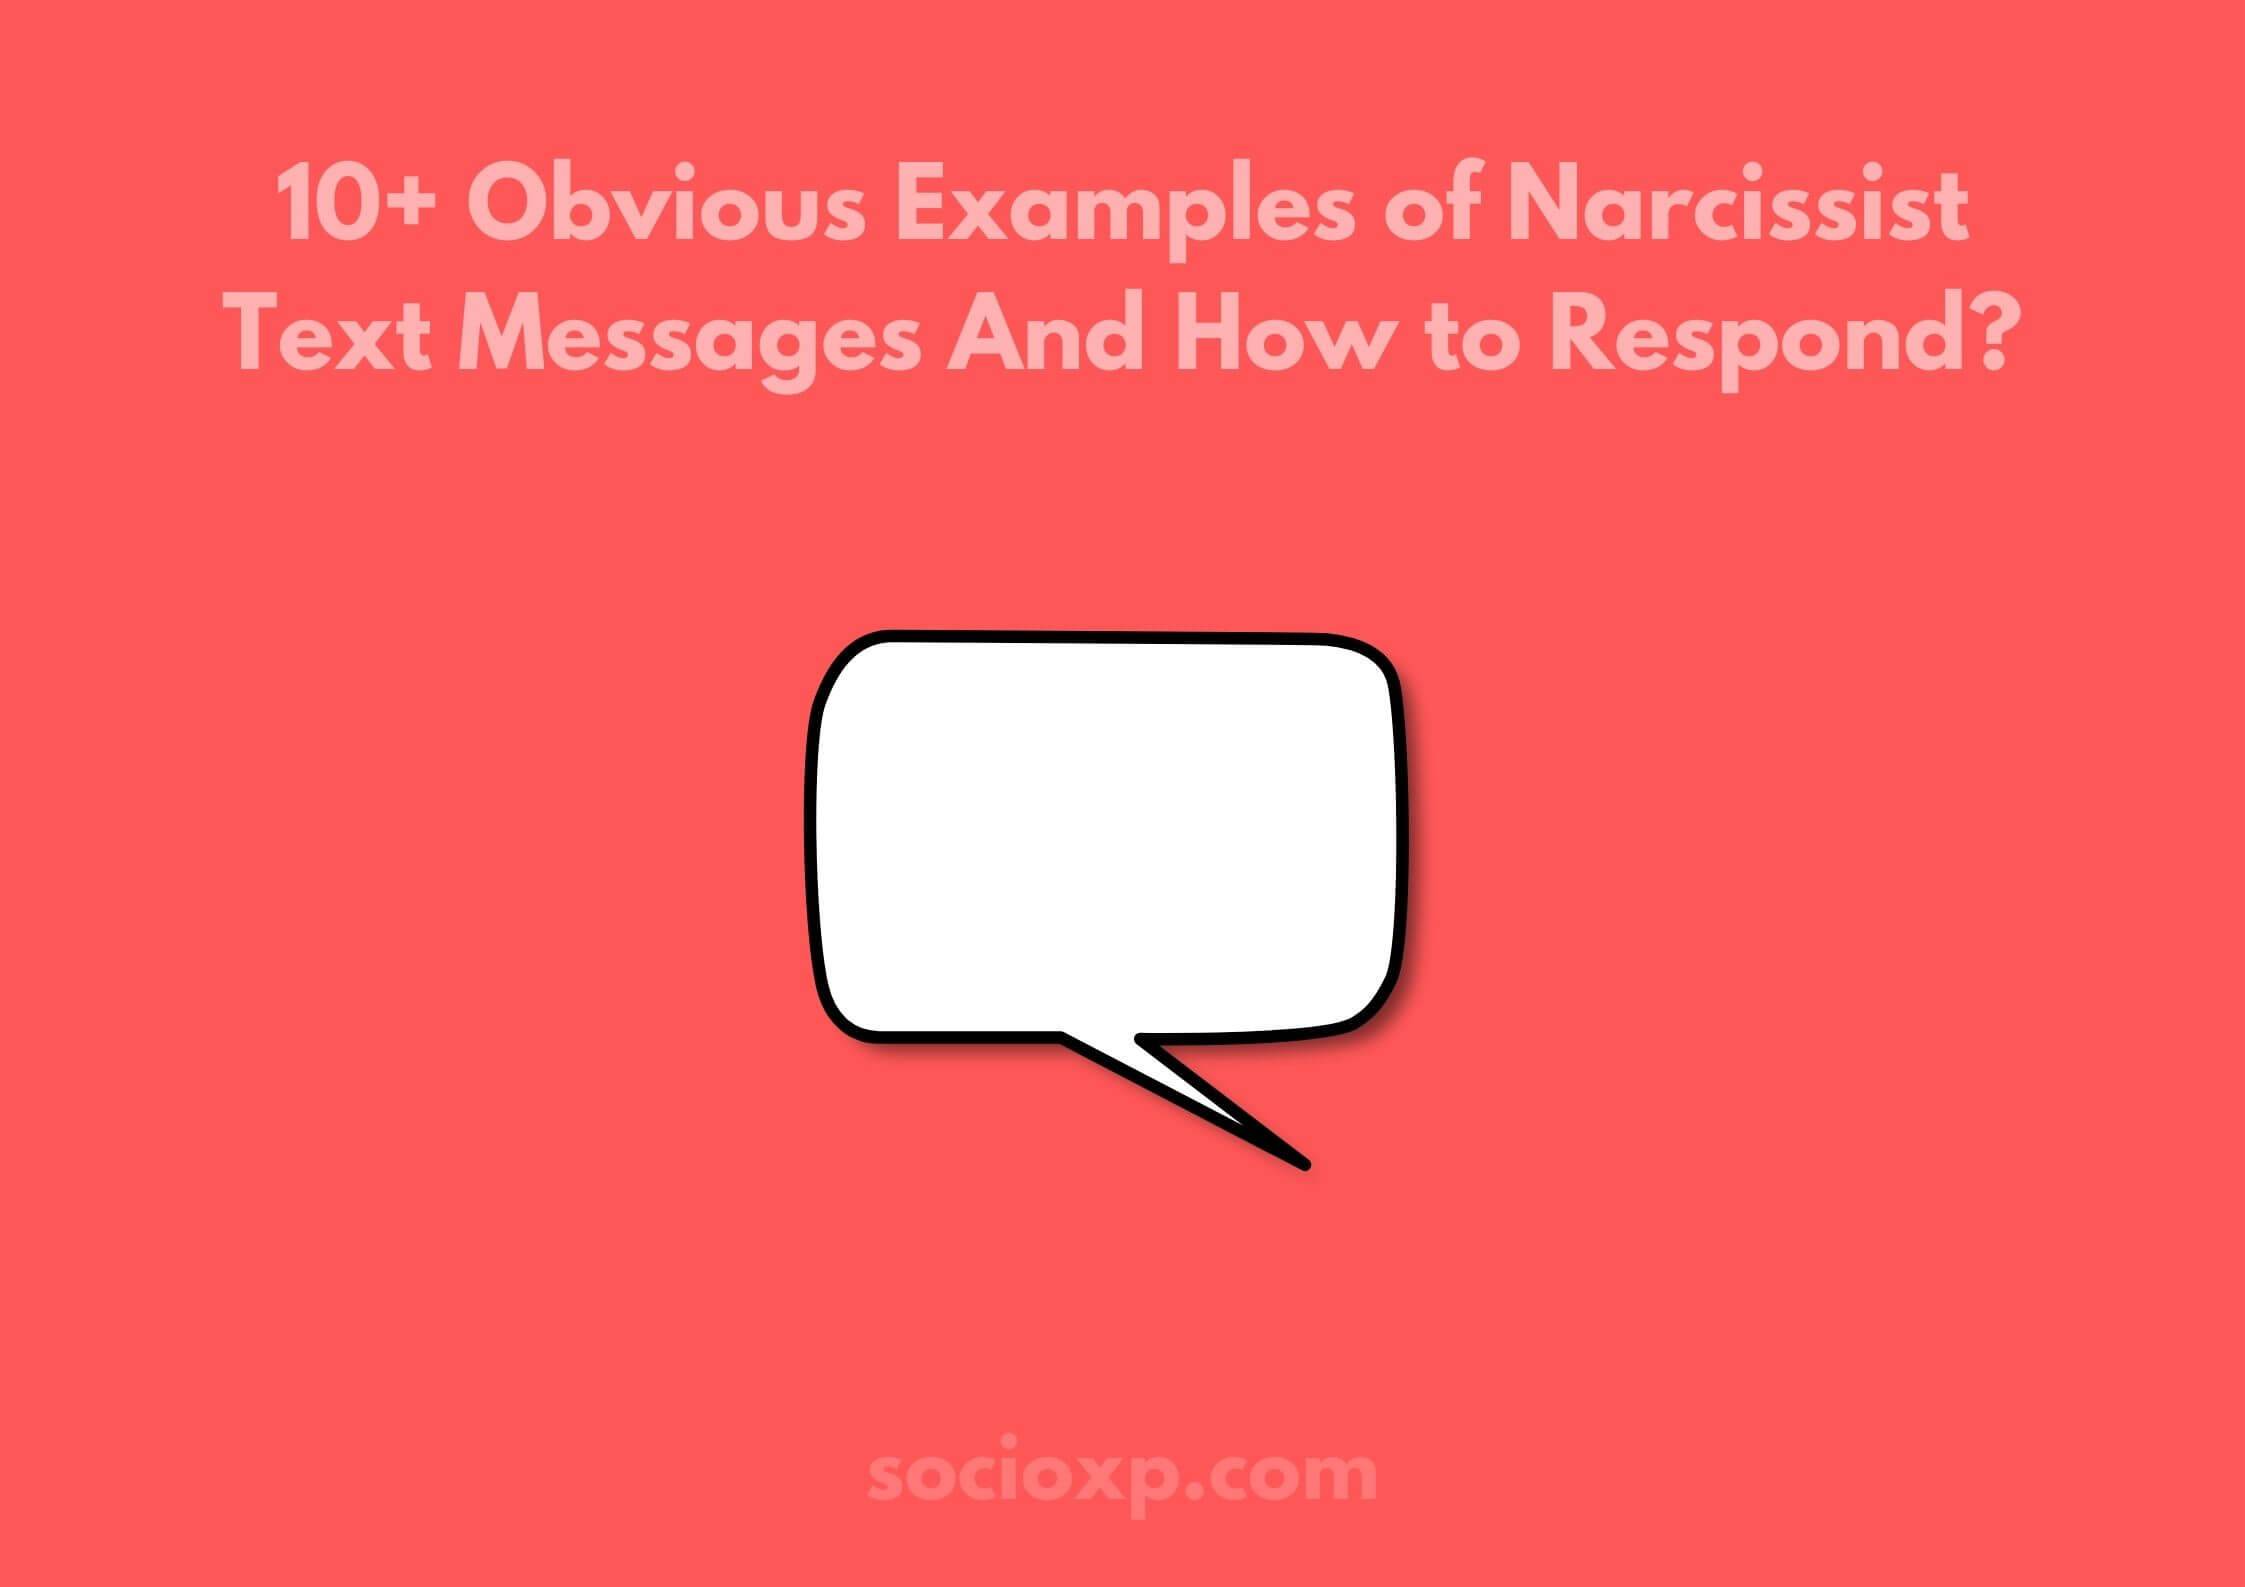 10+ Obvious Examples of Narcissist Text Messages And How to Respond?